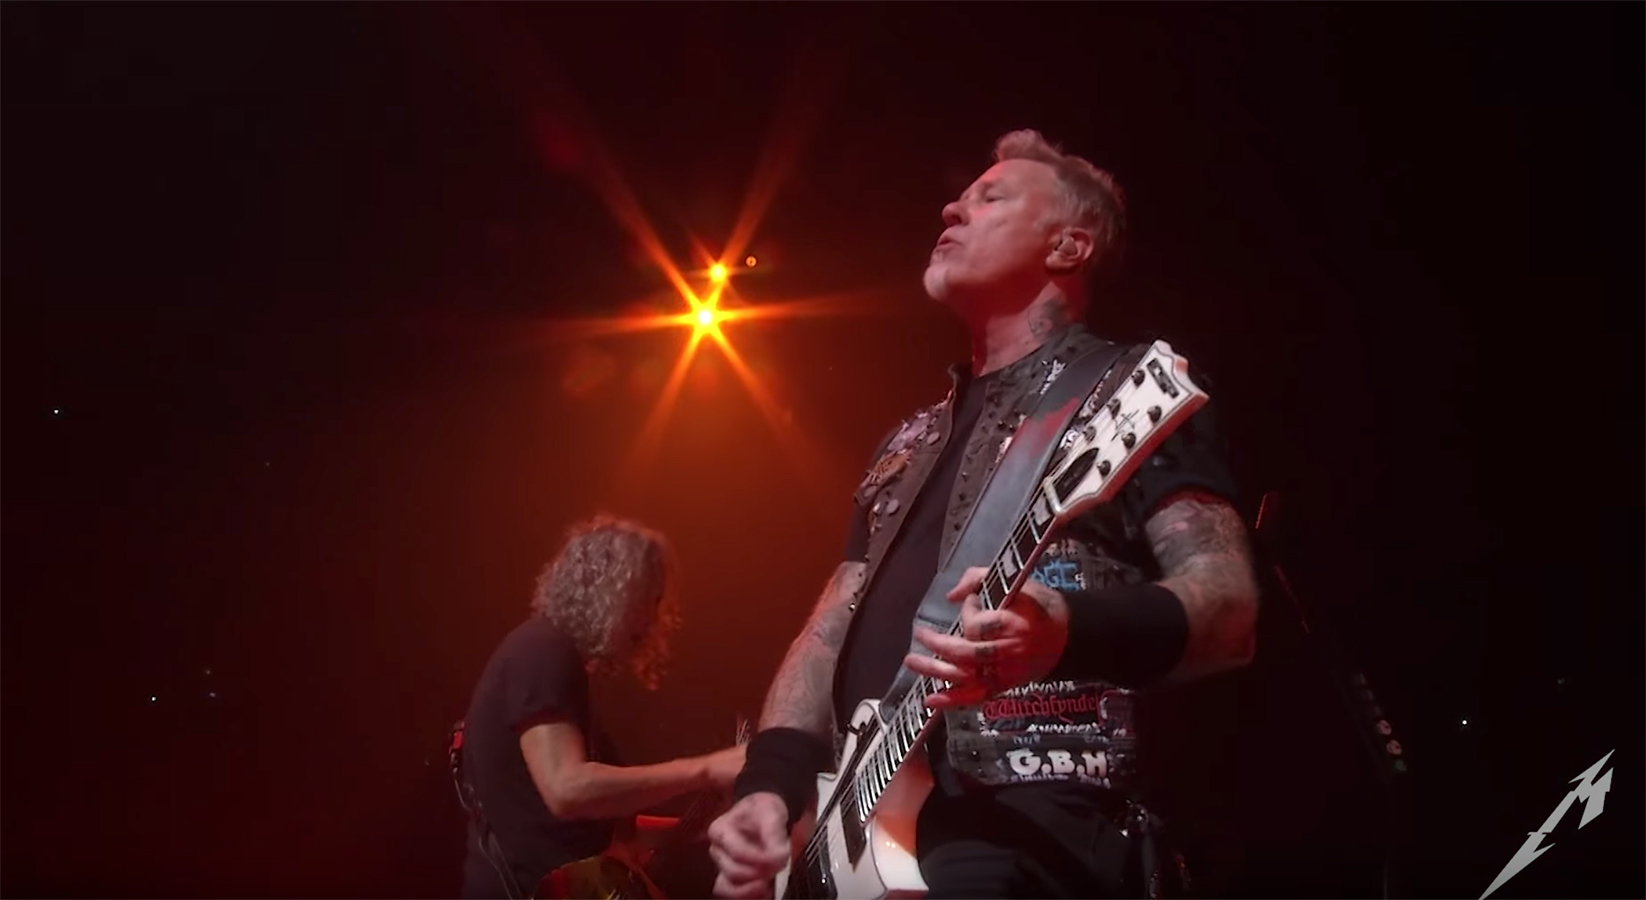 See Metallica Unleash Ripping Live Performance of "Creeping Death" in